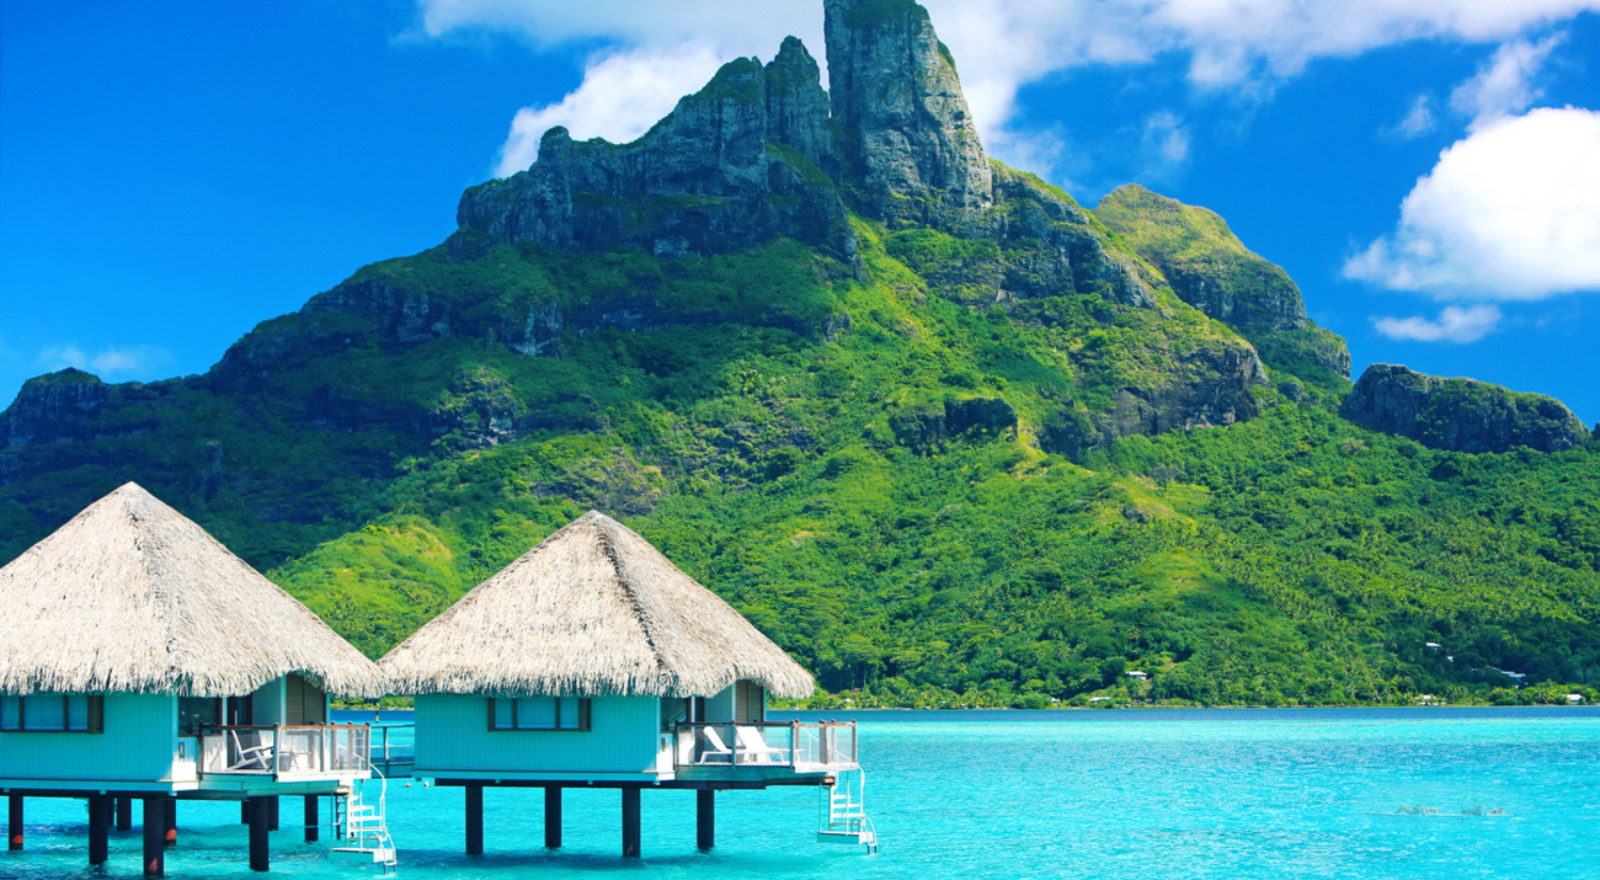 overwater villas in bora bora with tall rocky mountain in background